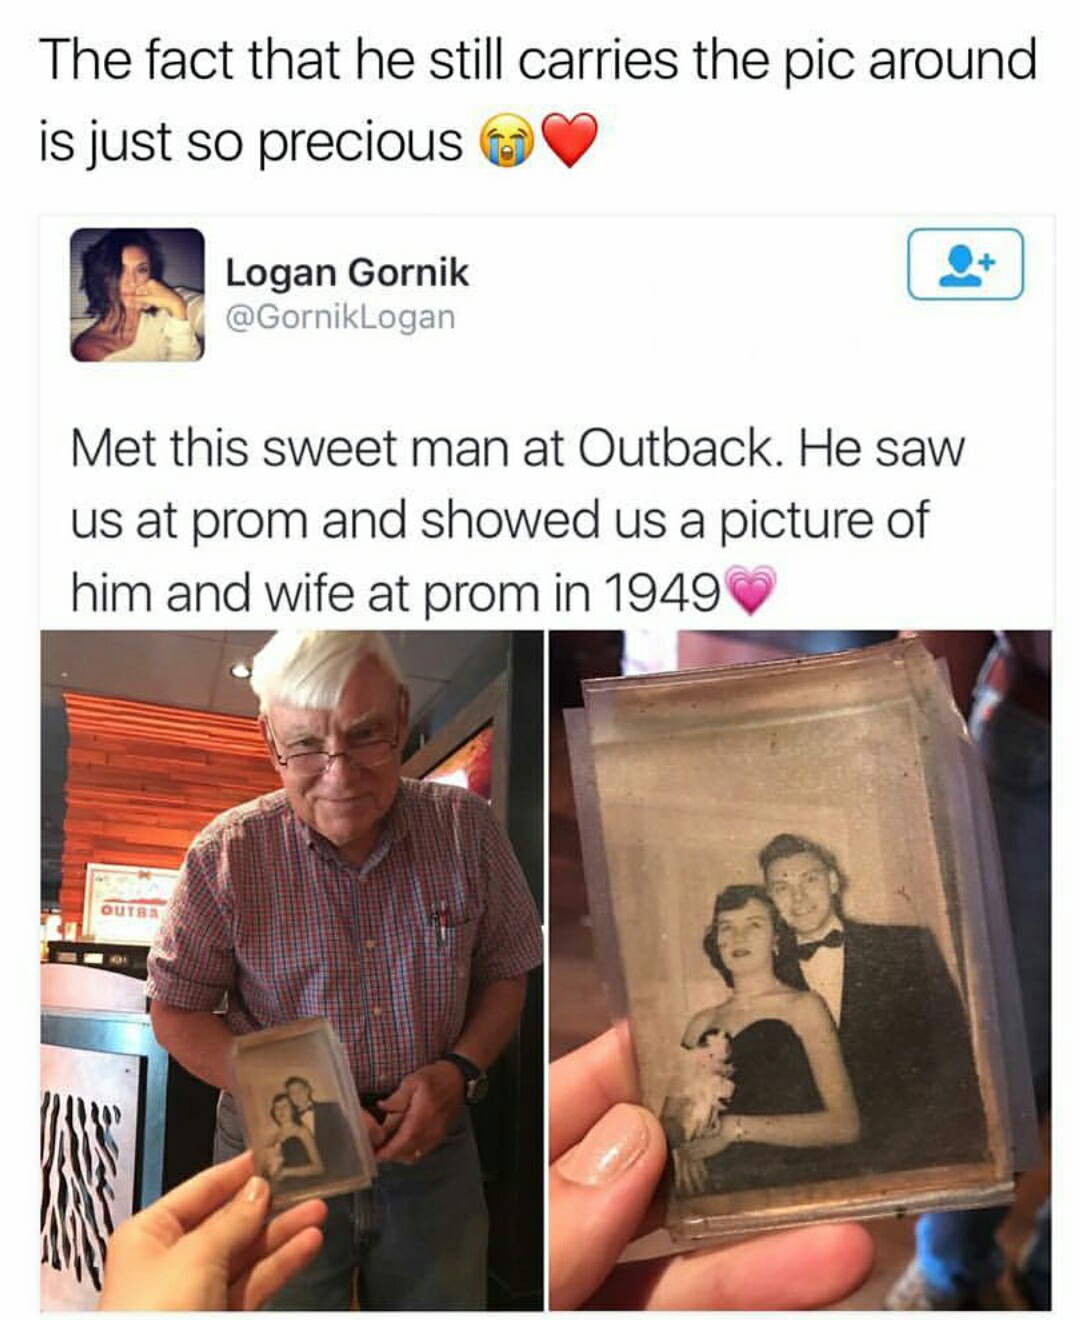 man at outback prom - The fact that he still carries the pic around is just so precious Logan Gornik Met this sweet man at Outback. He saw us at prom and showed us a picture of him and wife at prom in 1949 Outba